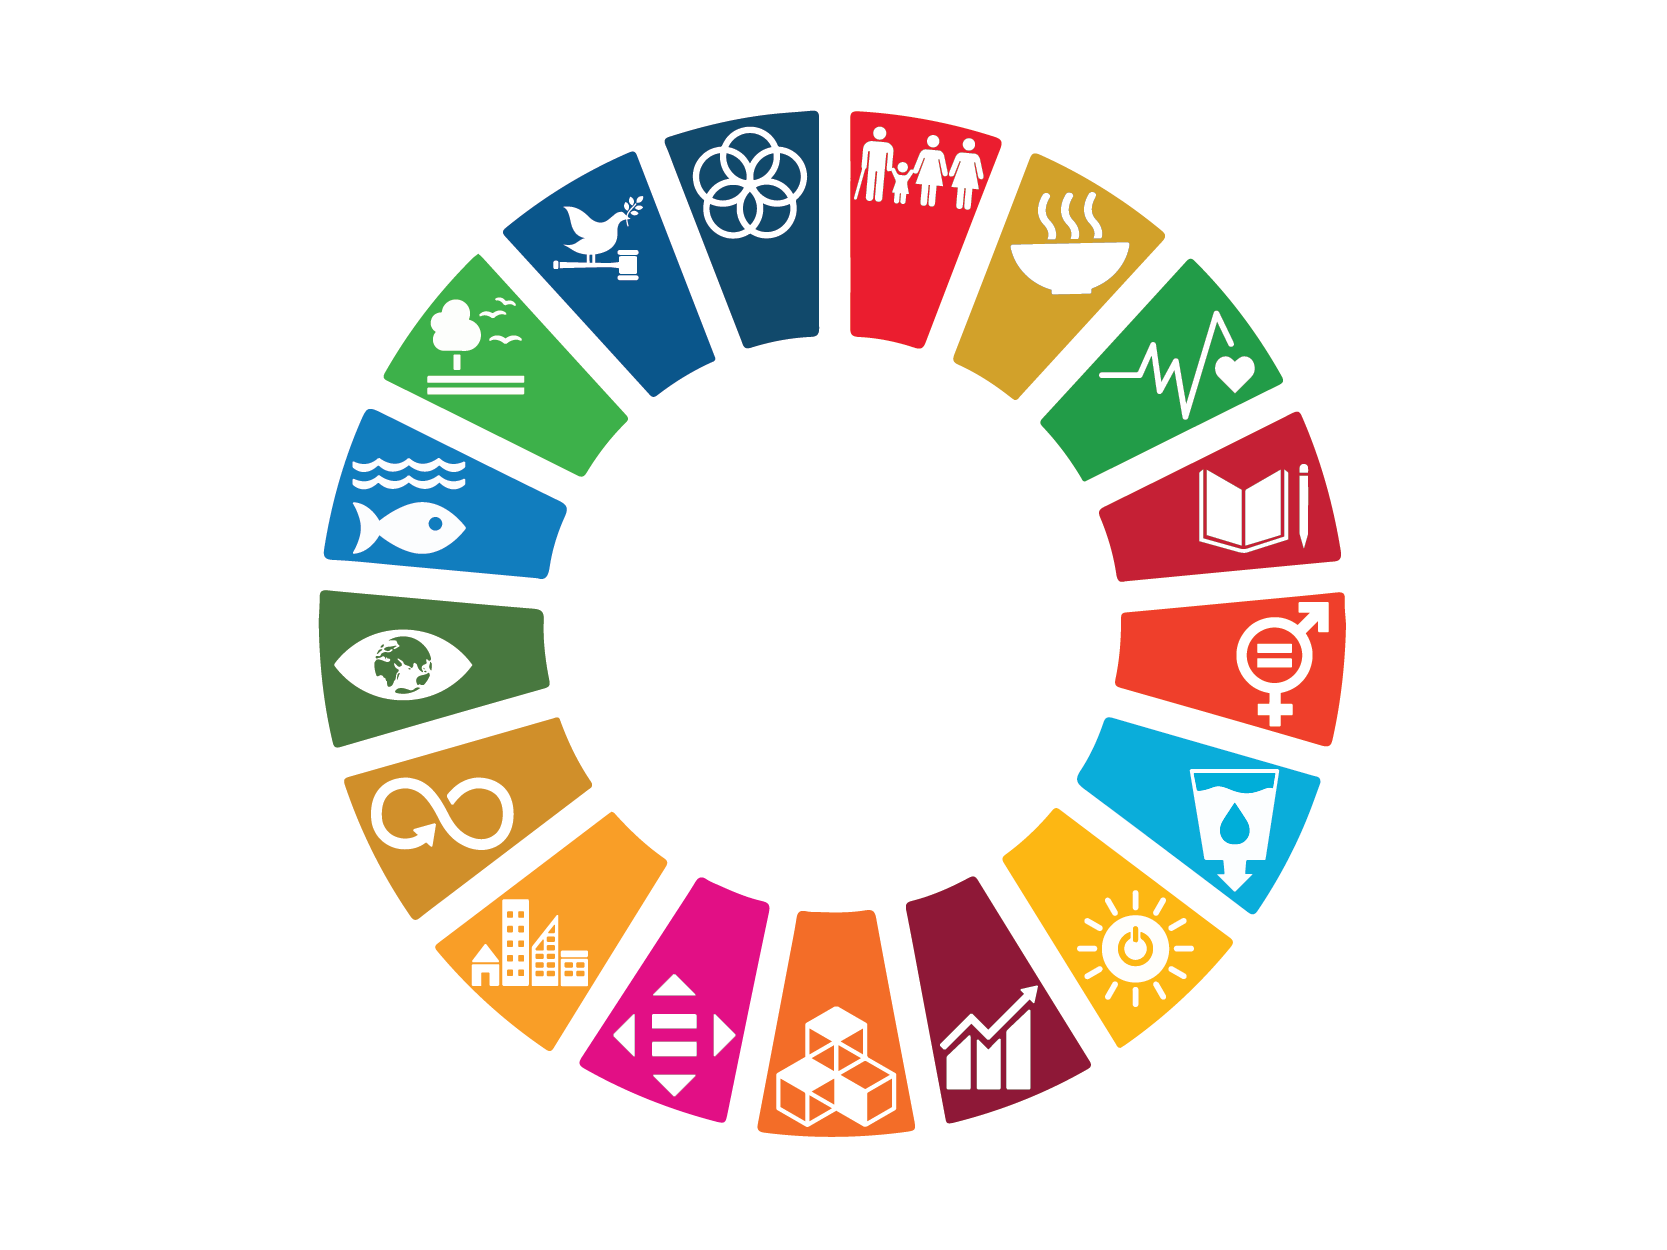 The United Nations SDG symbol of a wheel broken into 17 parts